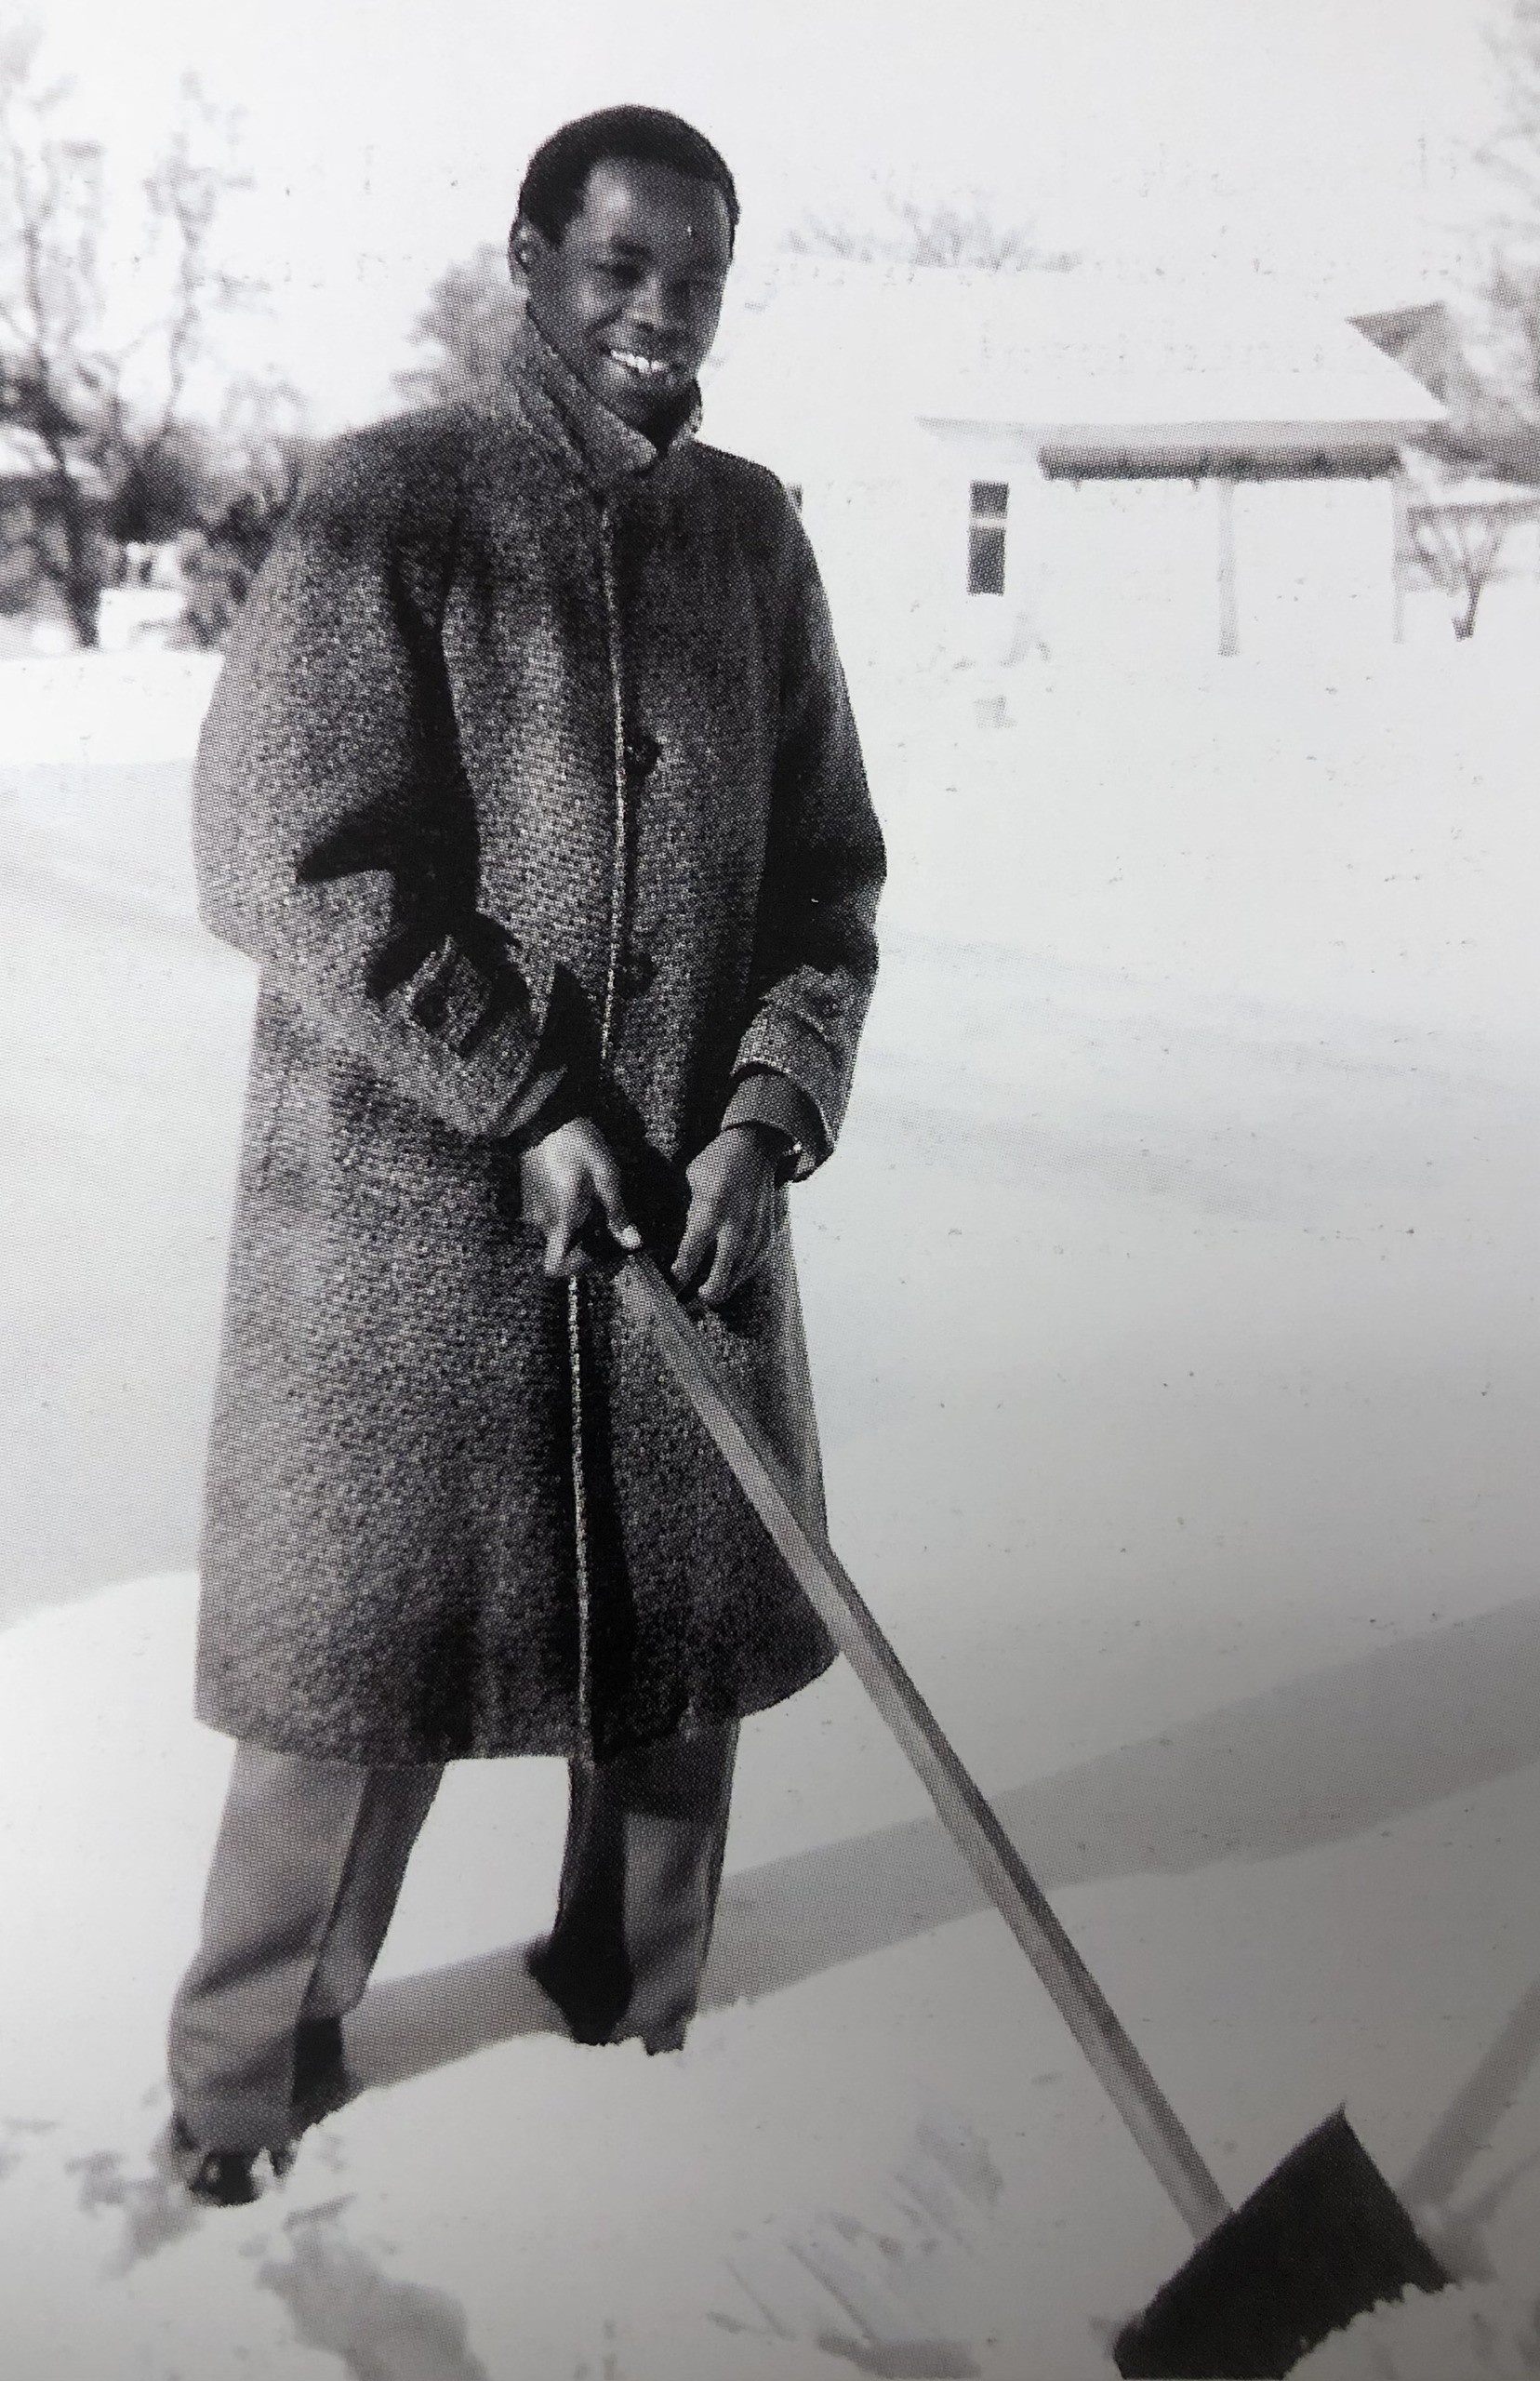 A man holds a snow shovel in a black and white photo.